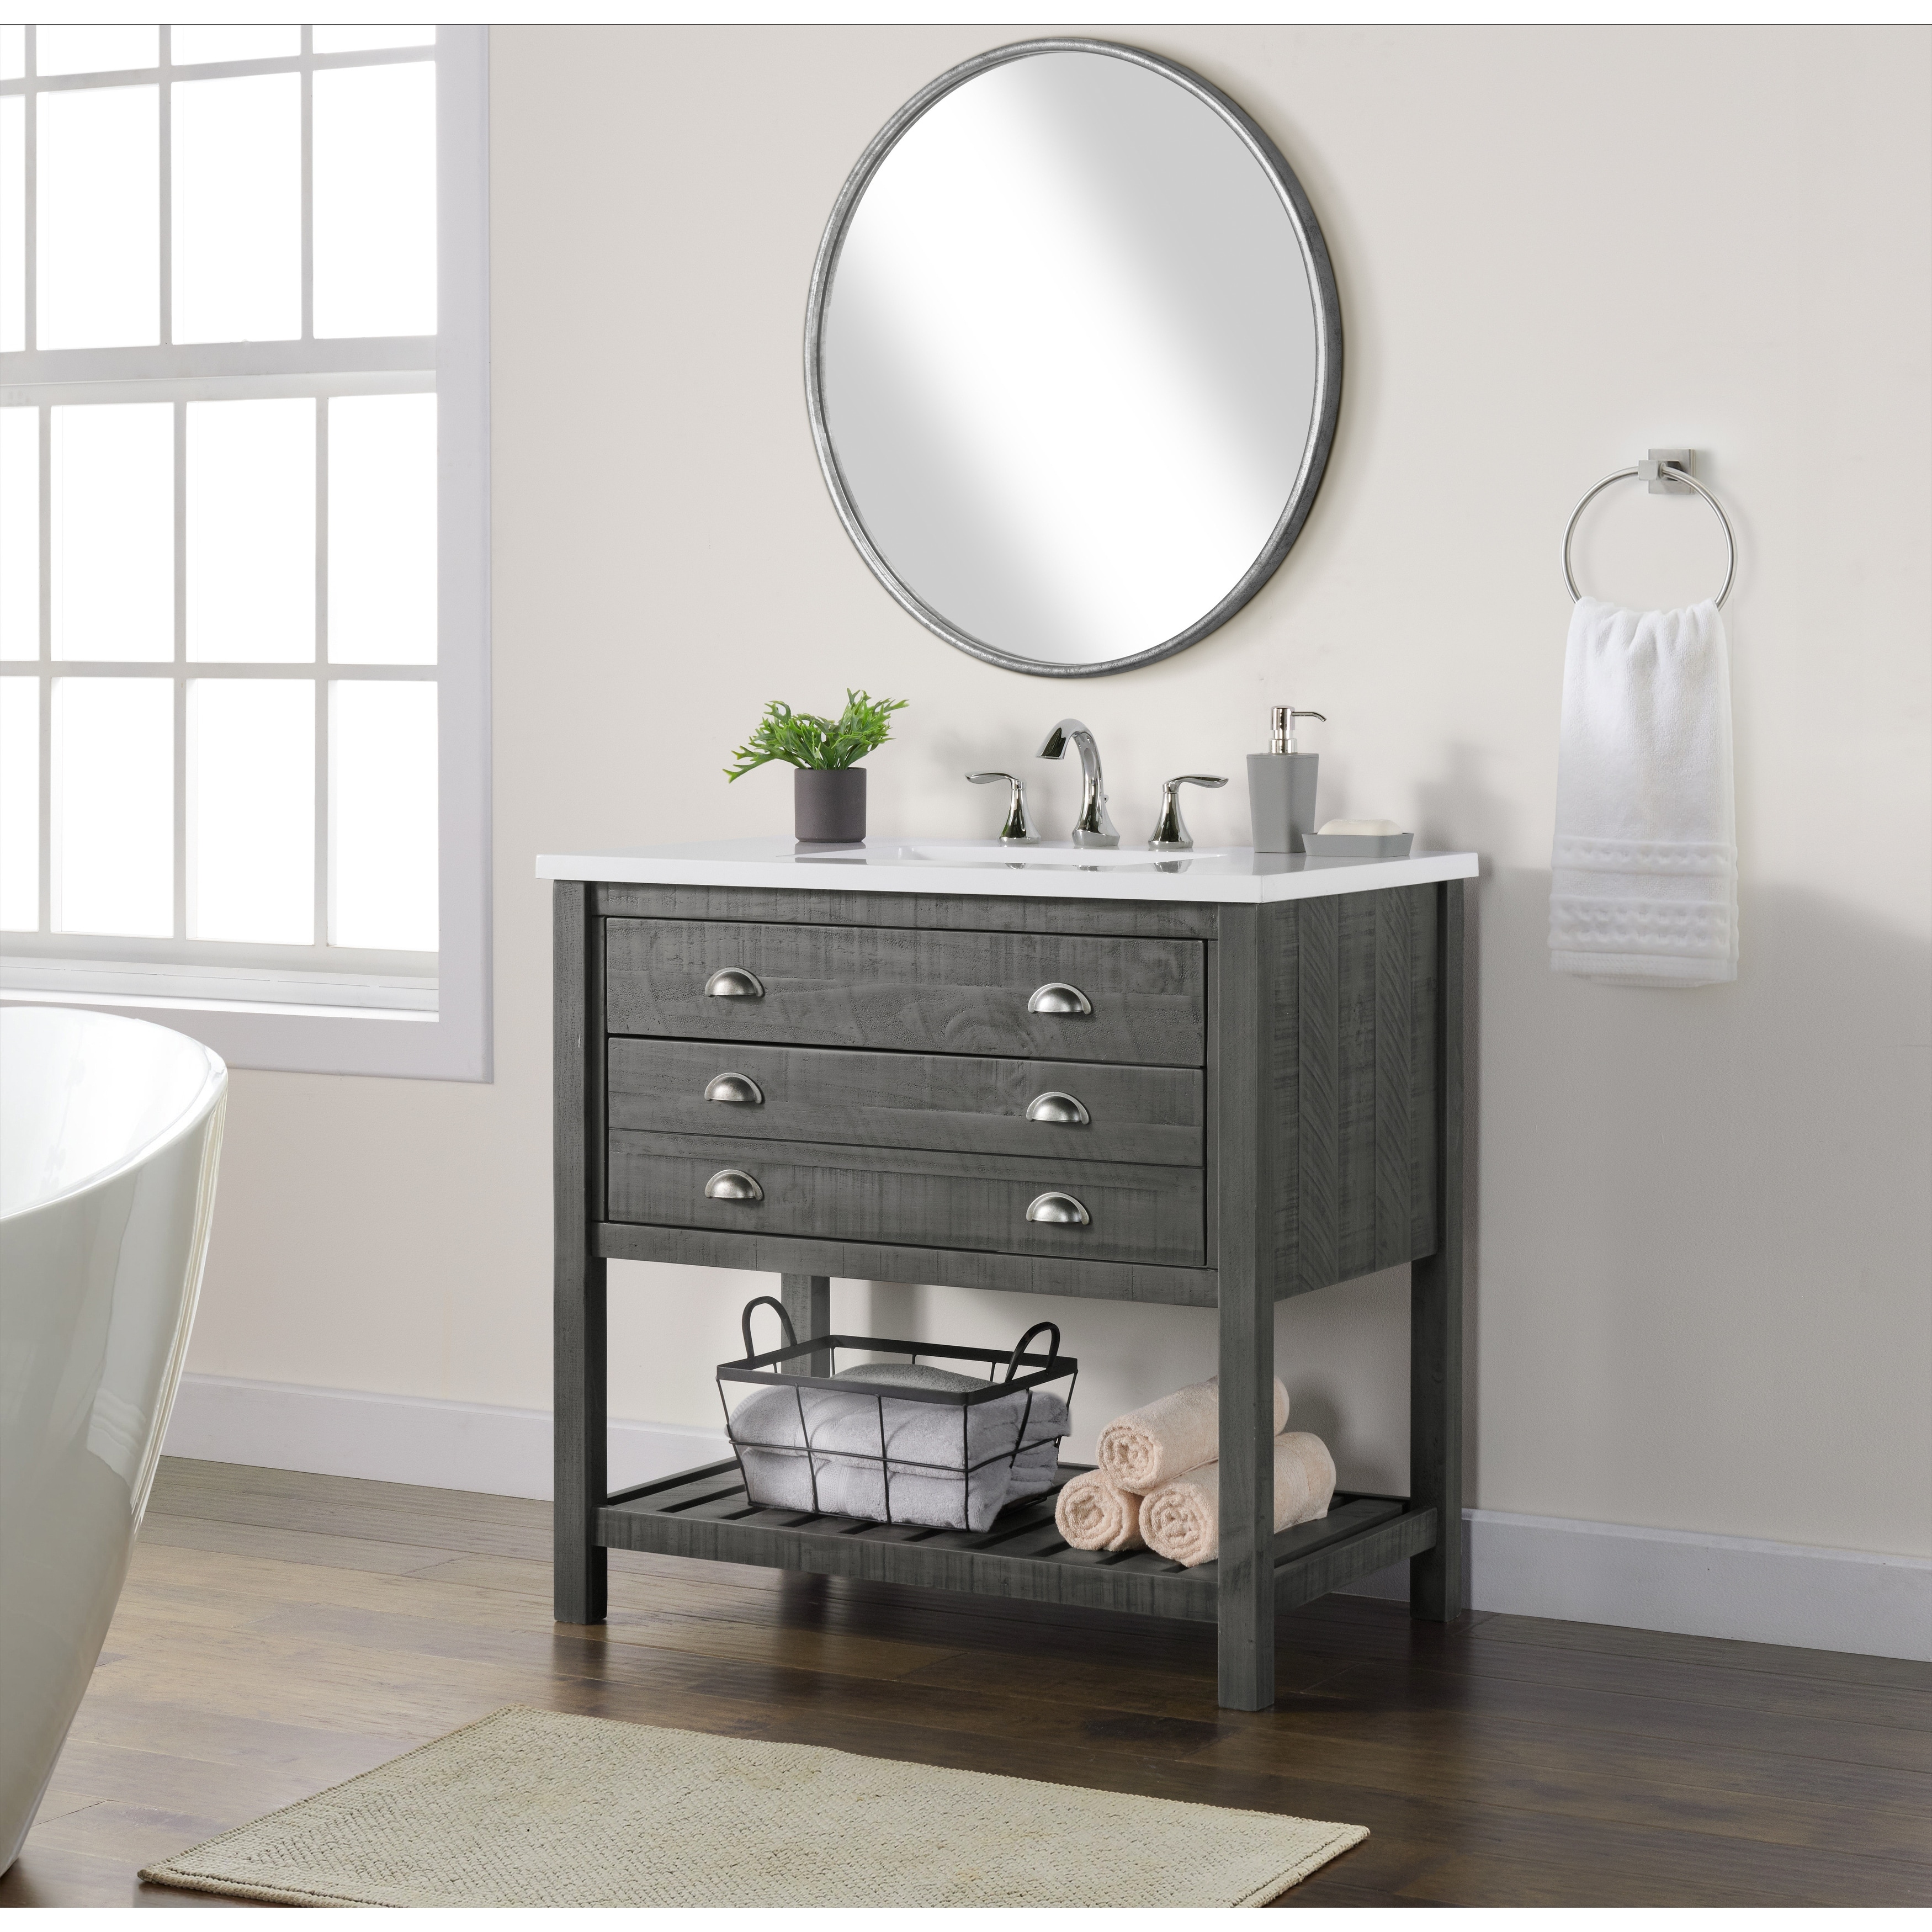 https://ak1.ostkcdn.com/images/products/is/images/direct/ae6c1e60a4a19dad5e53715914ccc0424d7c57f9/Monterey-Farmhouse-37%22-Single-Bathroom-Vanity-with-Top.jpg